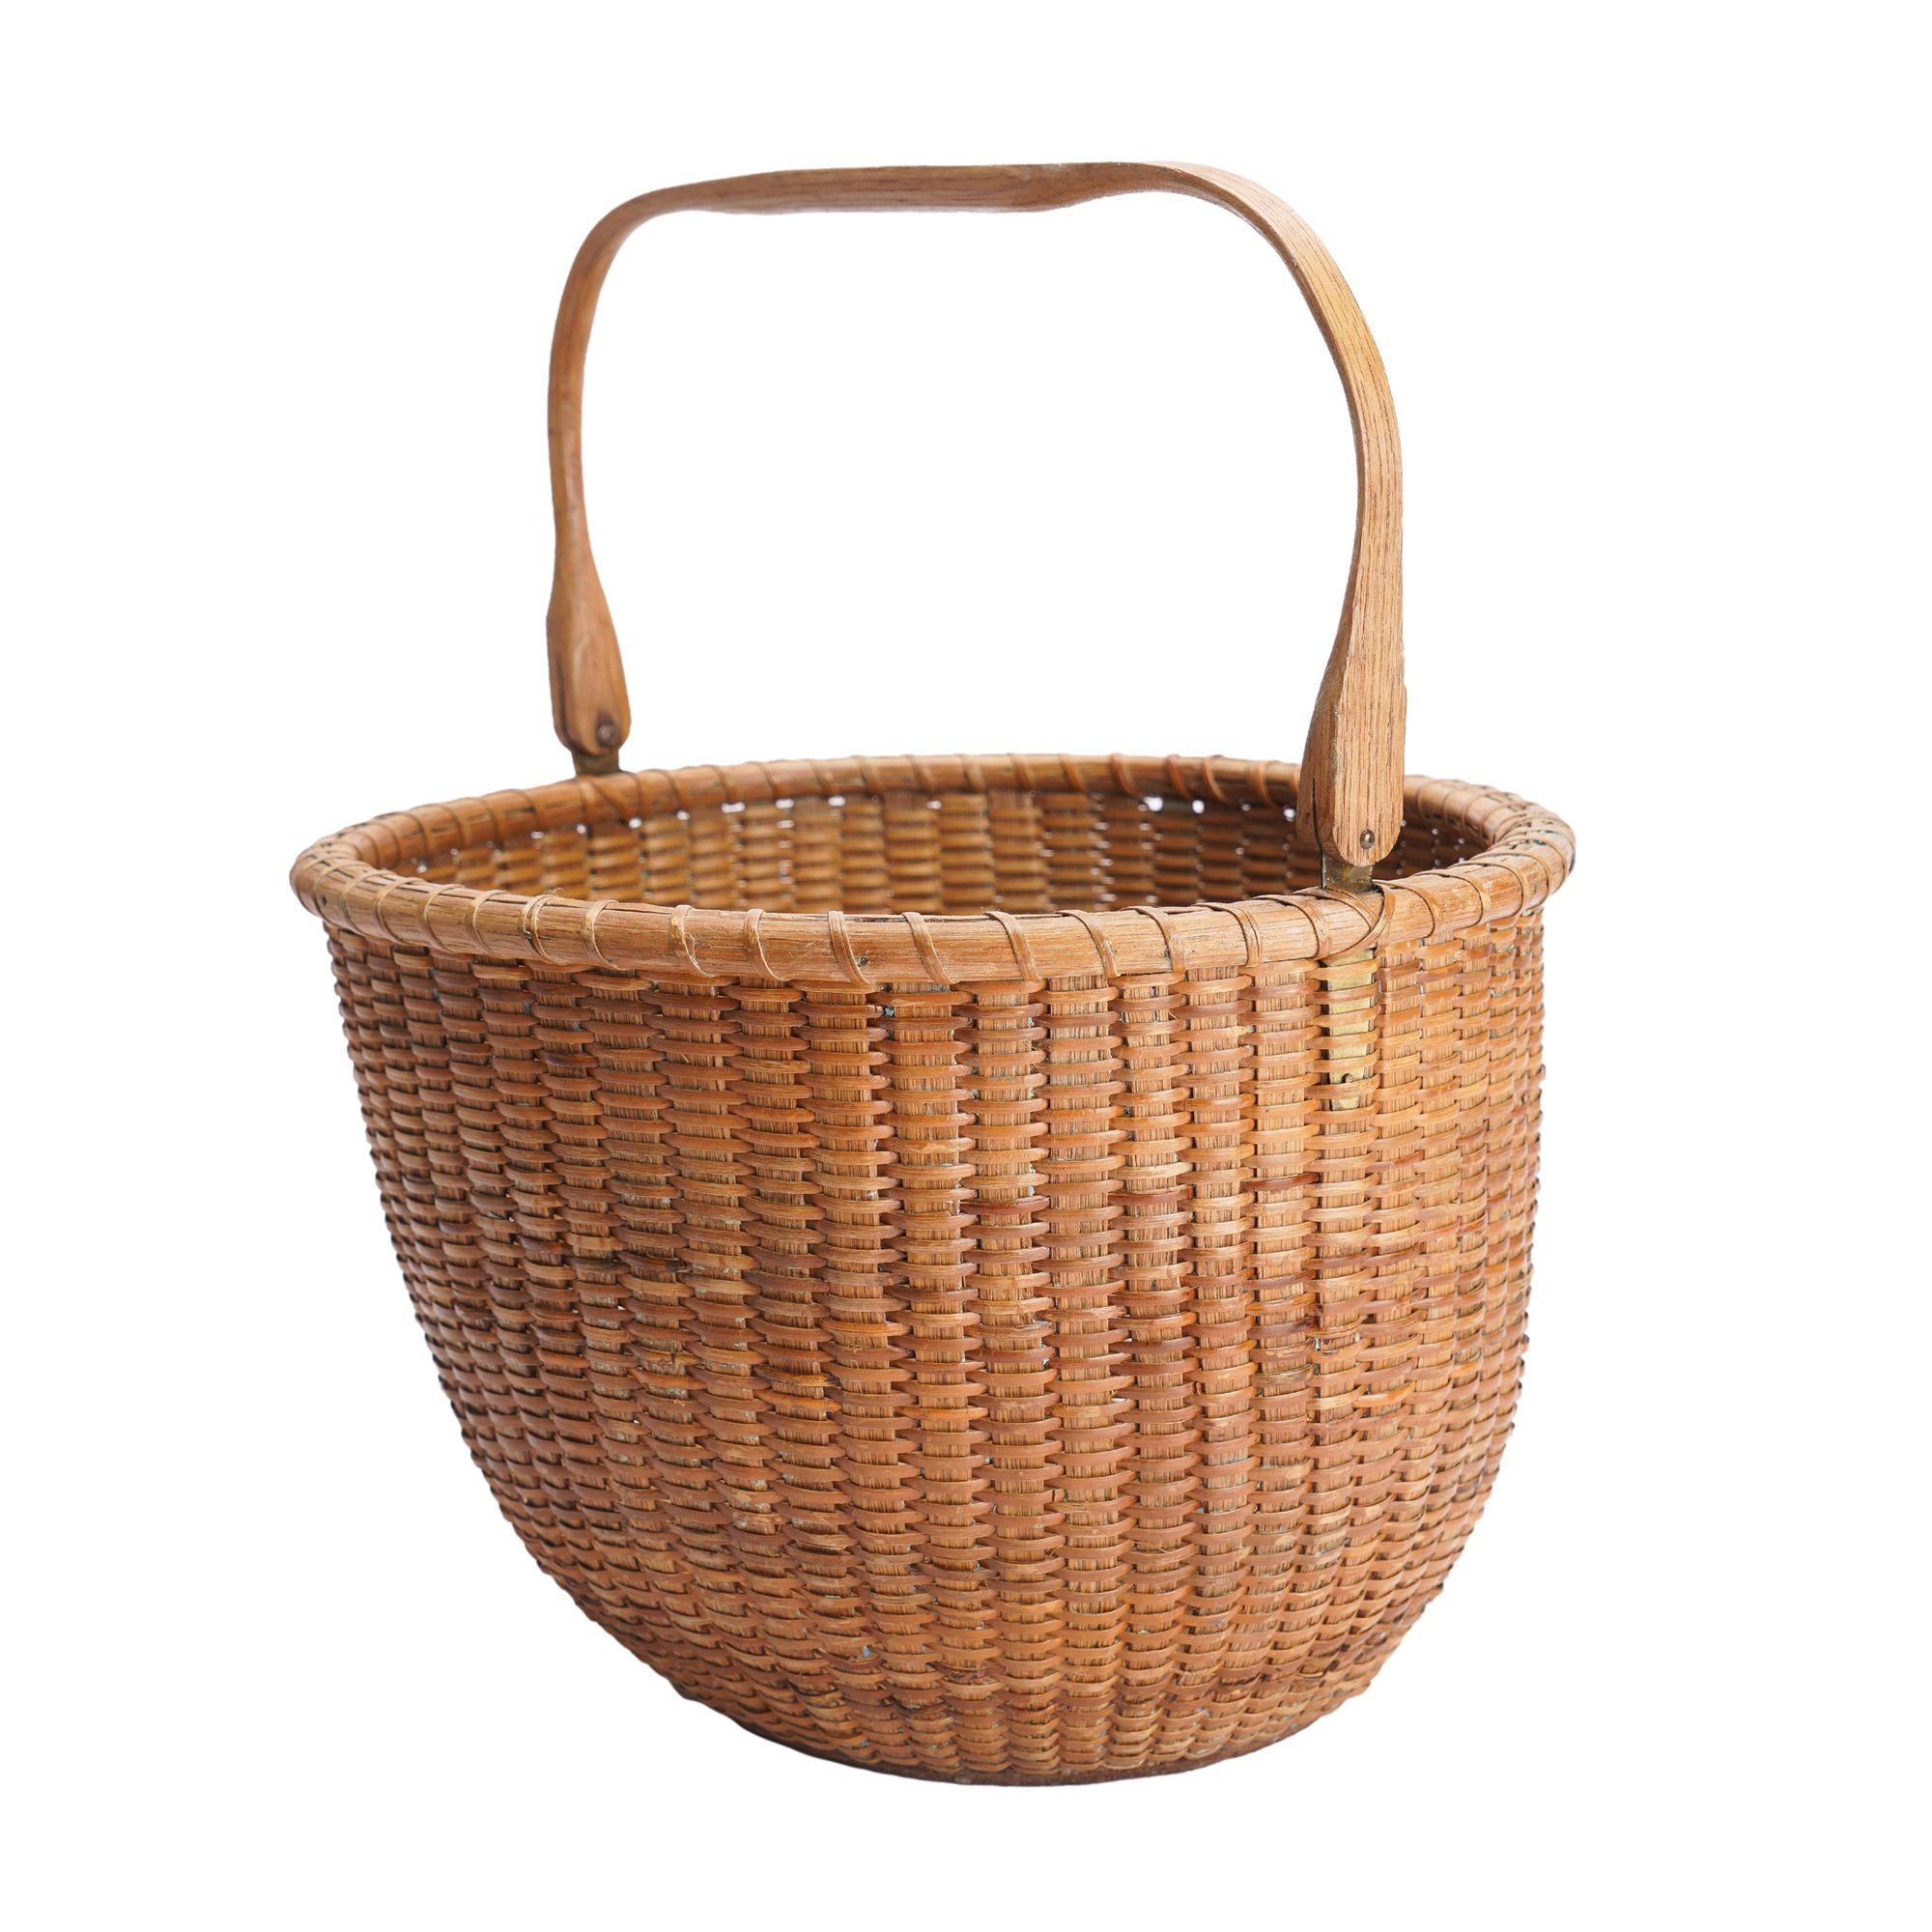 Large vintage Nantucket lighthouse basket with heavy rattan rim and stays. The basket features a hinged and carved oak handle which is squared off across the apex and carved with the initial 